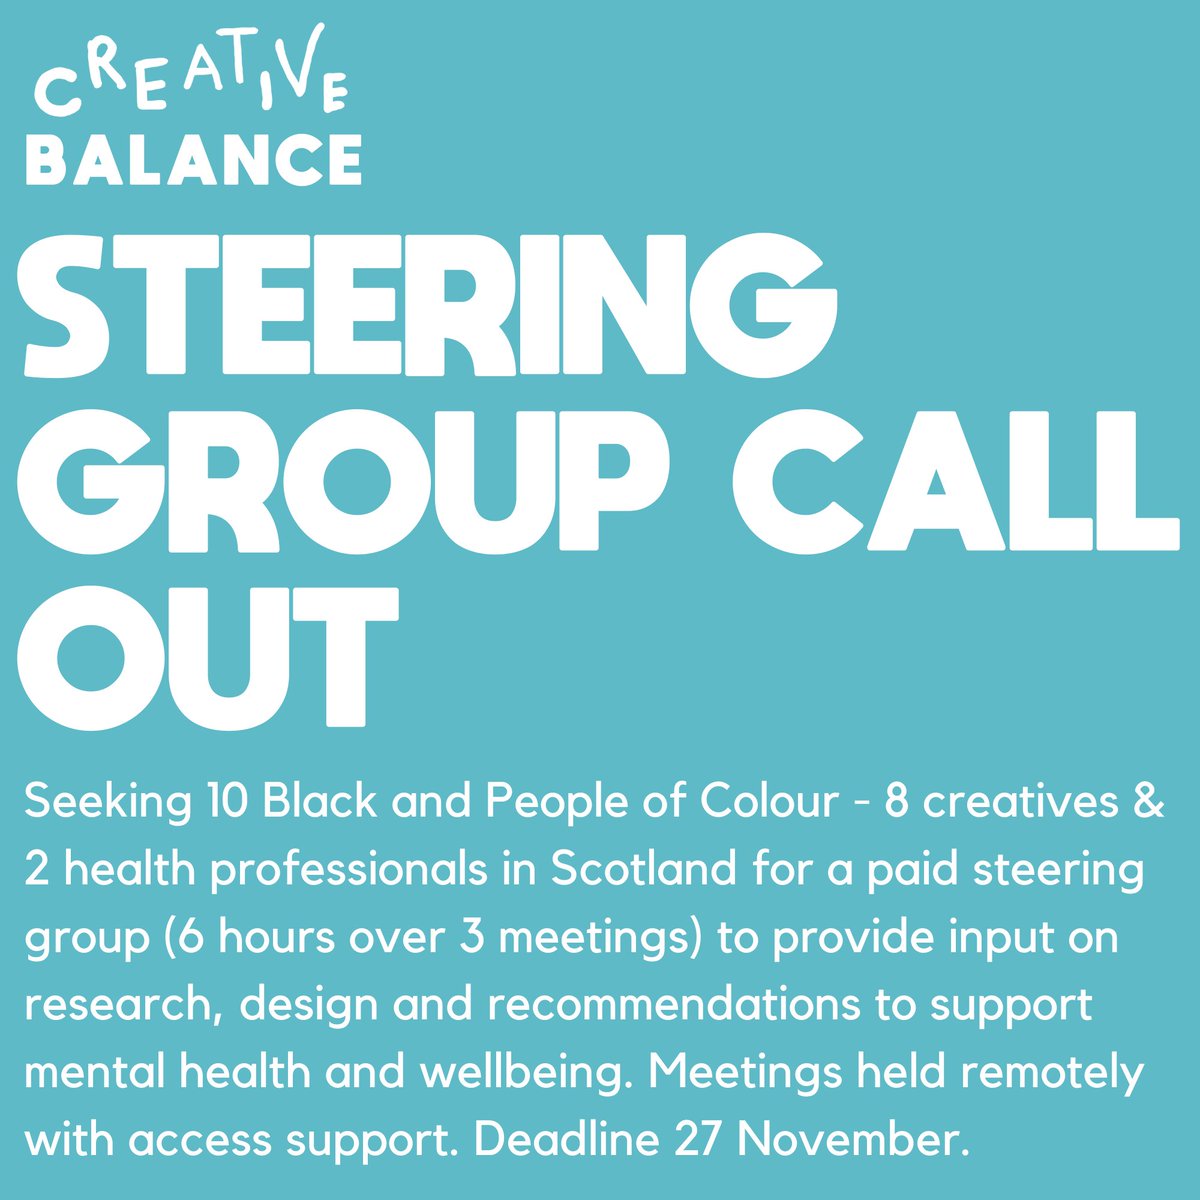 Seeking 10 Black & People of Colour in Scotland for a paid Steering Group They will provide input on research, design & recommendations to support mental health & wellbeing Remote meetings w/ access support. Deadline Nov 27 creativebalance.scot